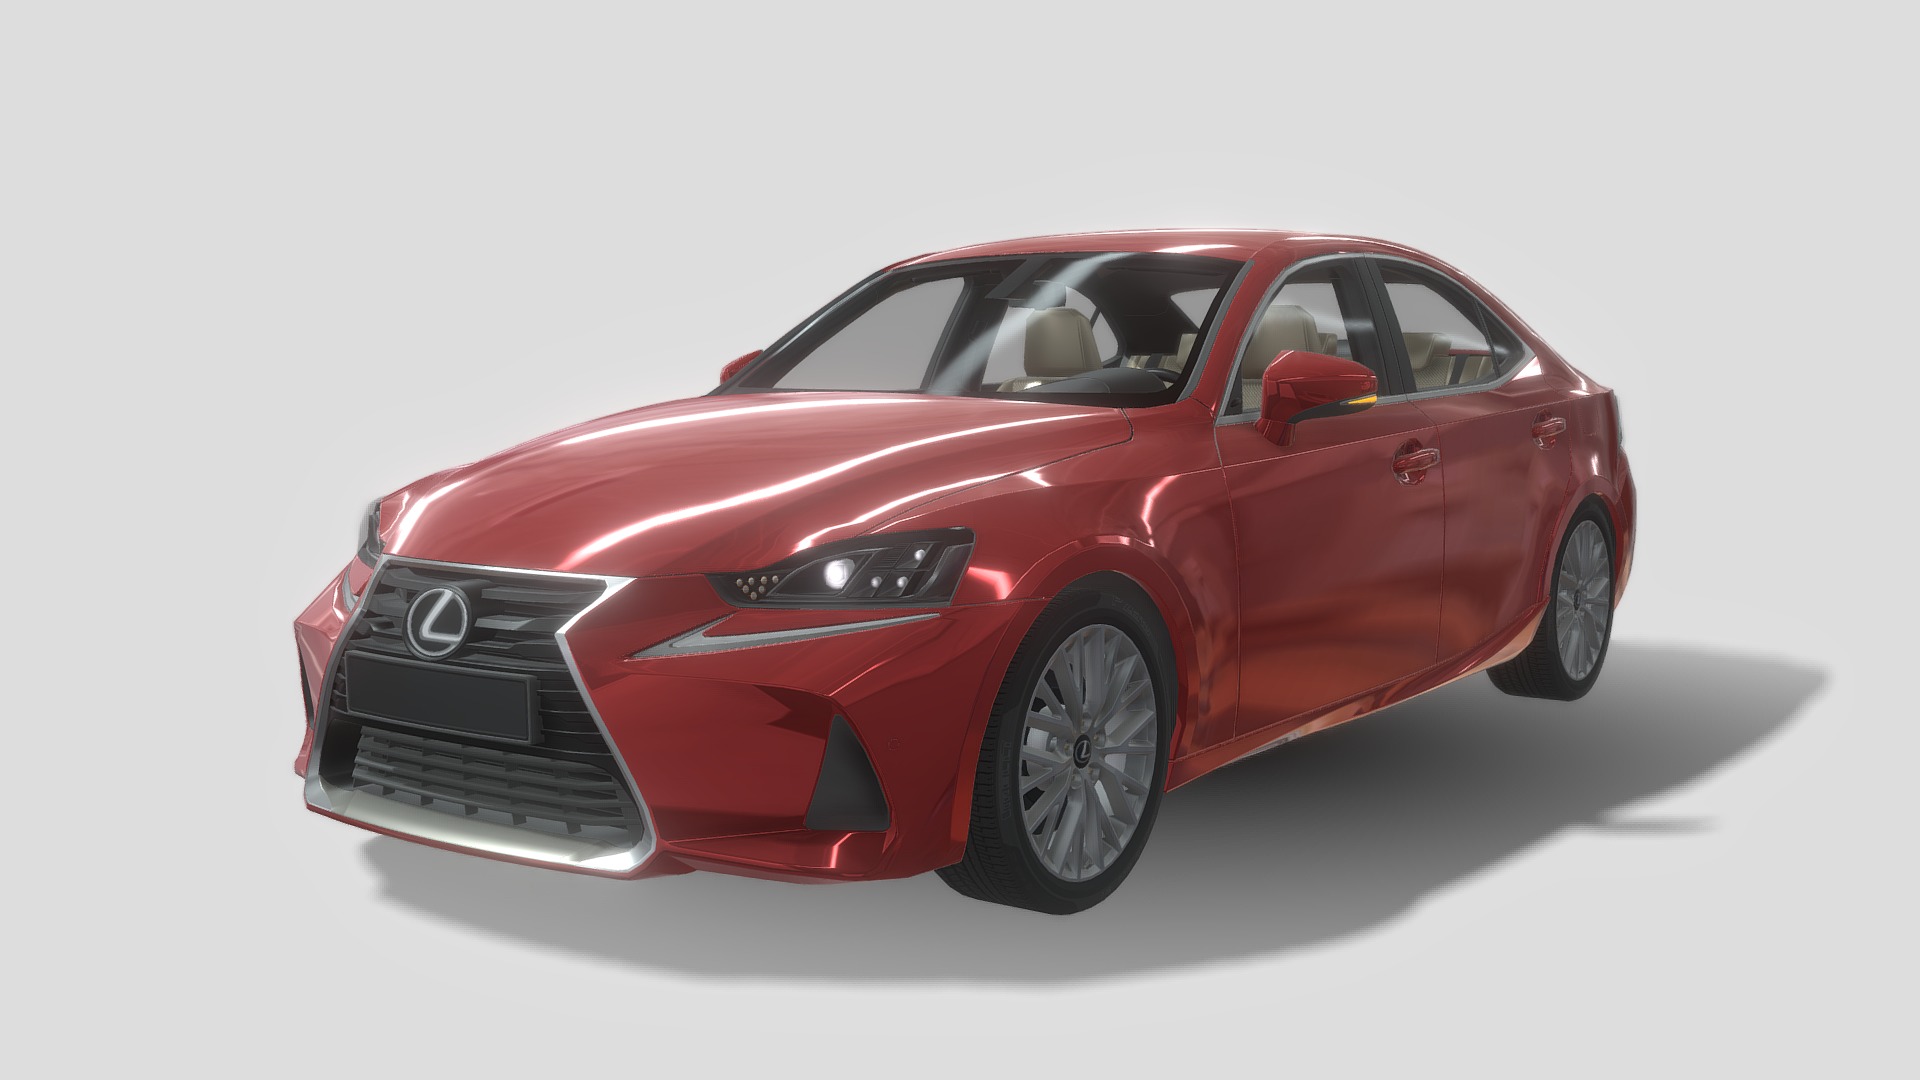 3D model Lexus Luxurycar Model - This is a 3D model of the Lexus Luxurycar Model. The 3D model is about a red car with a white background.